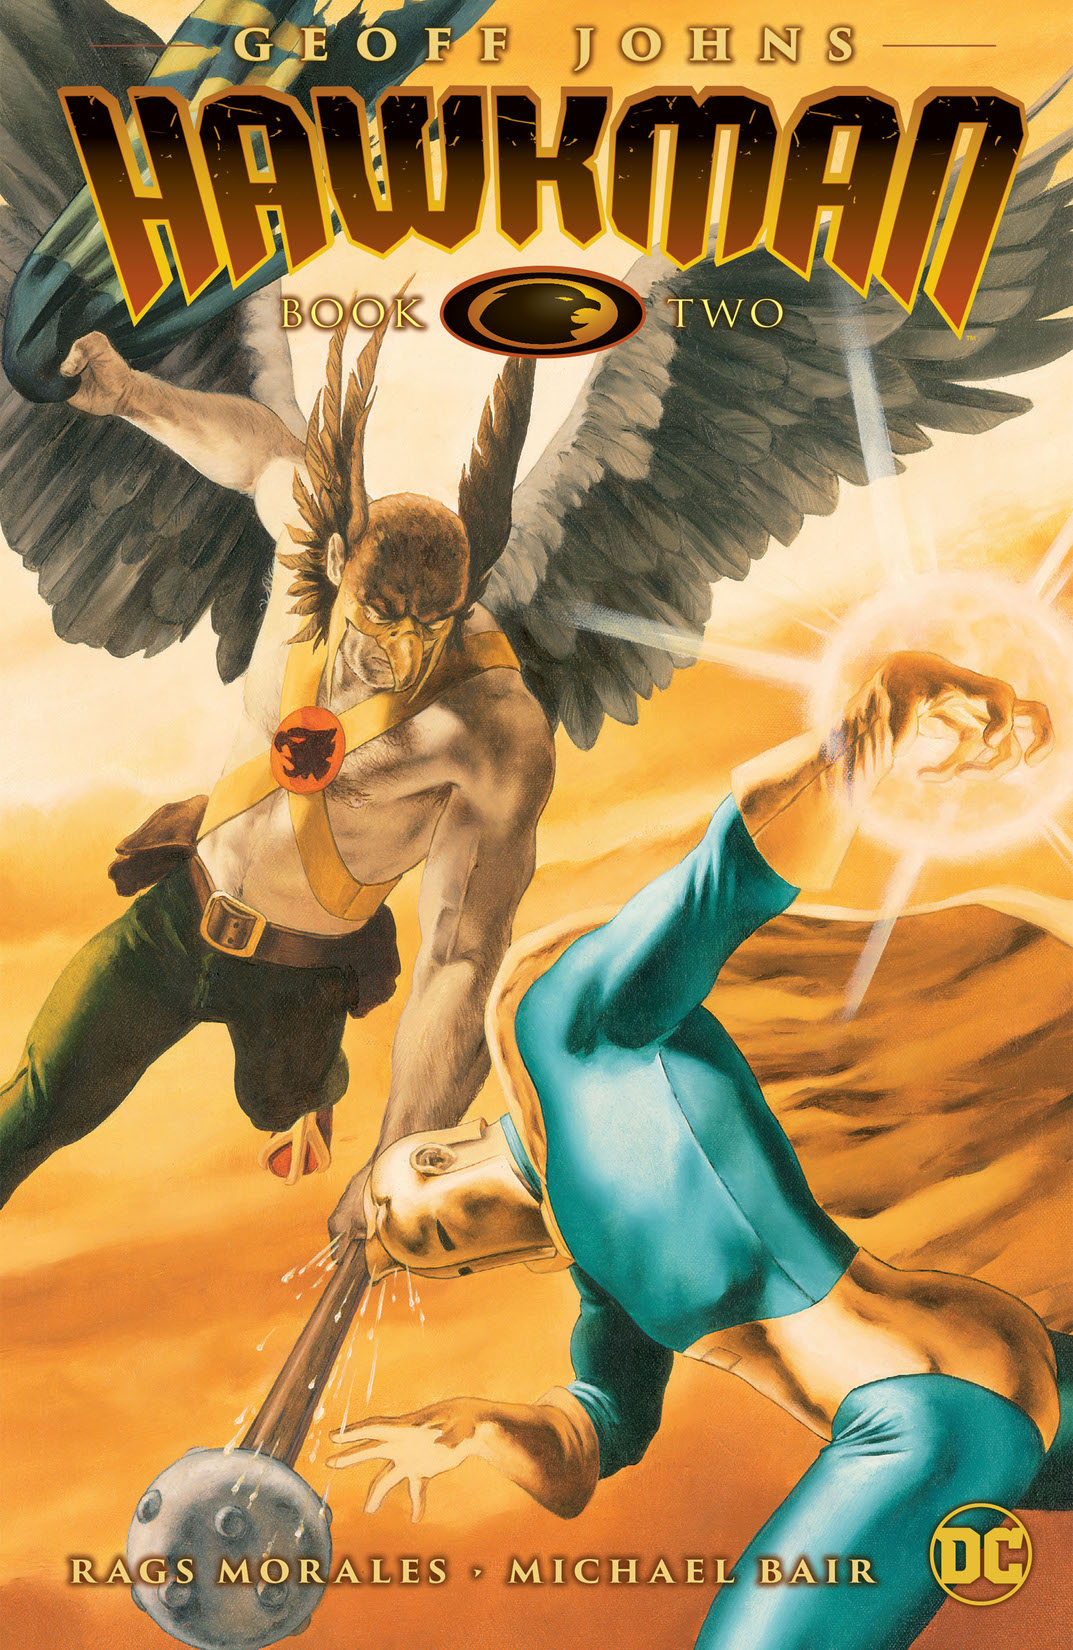 Hawkman by Geoff Johns Book Two preview images